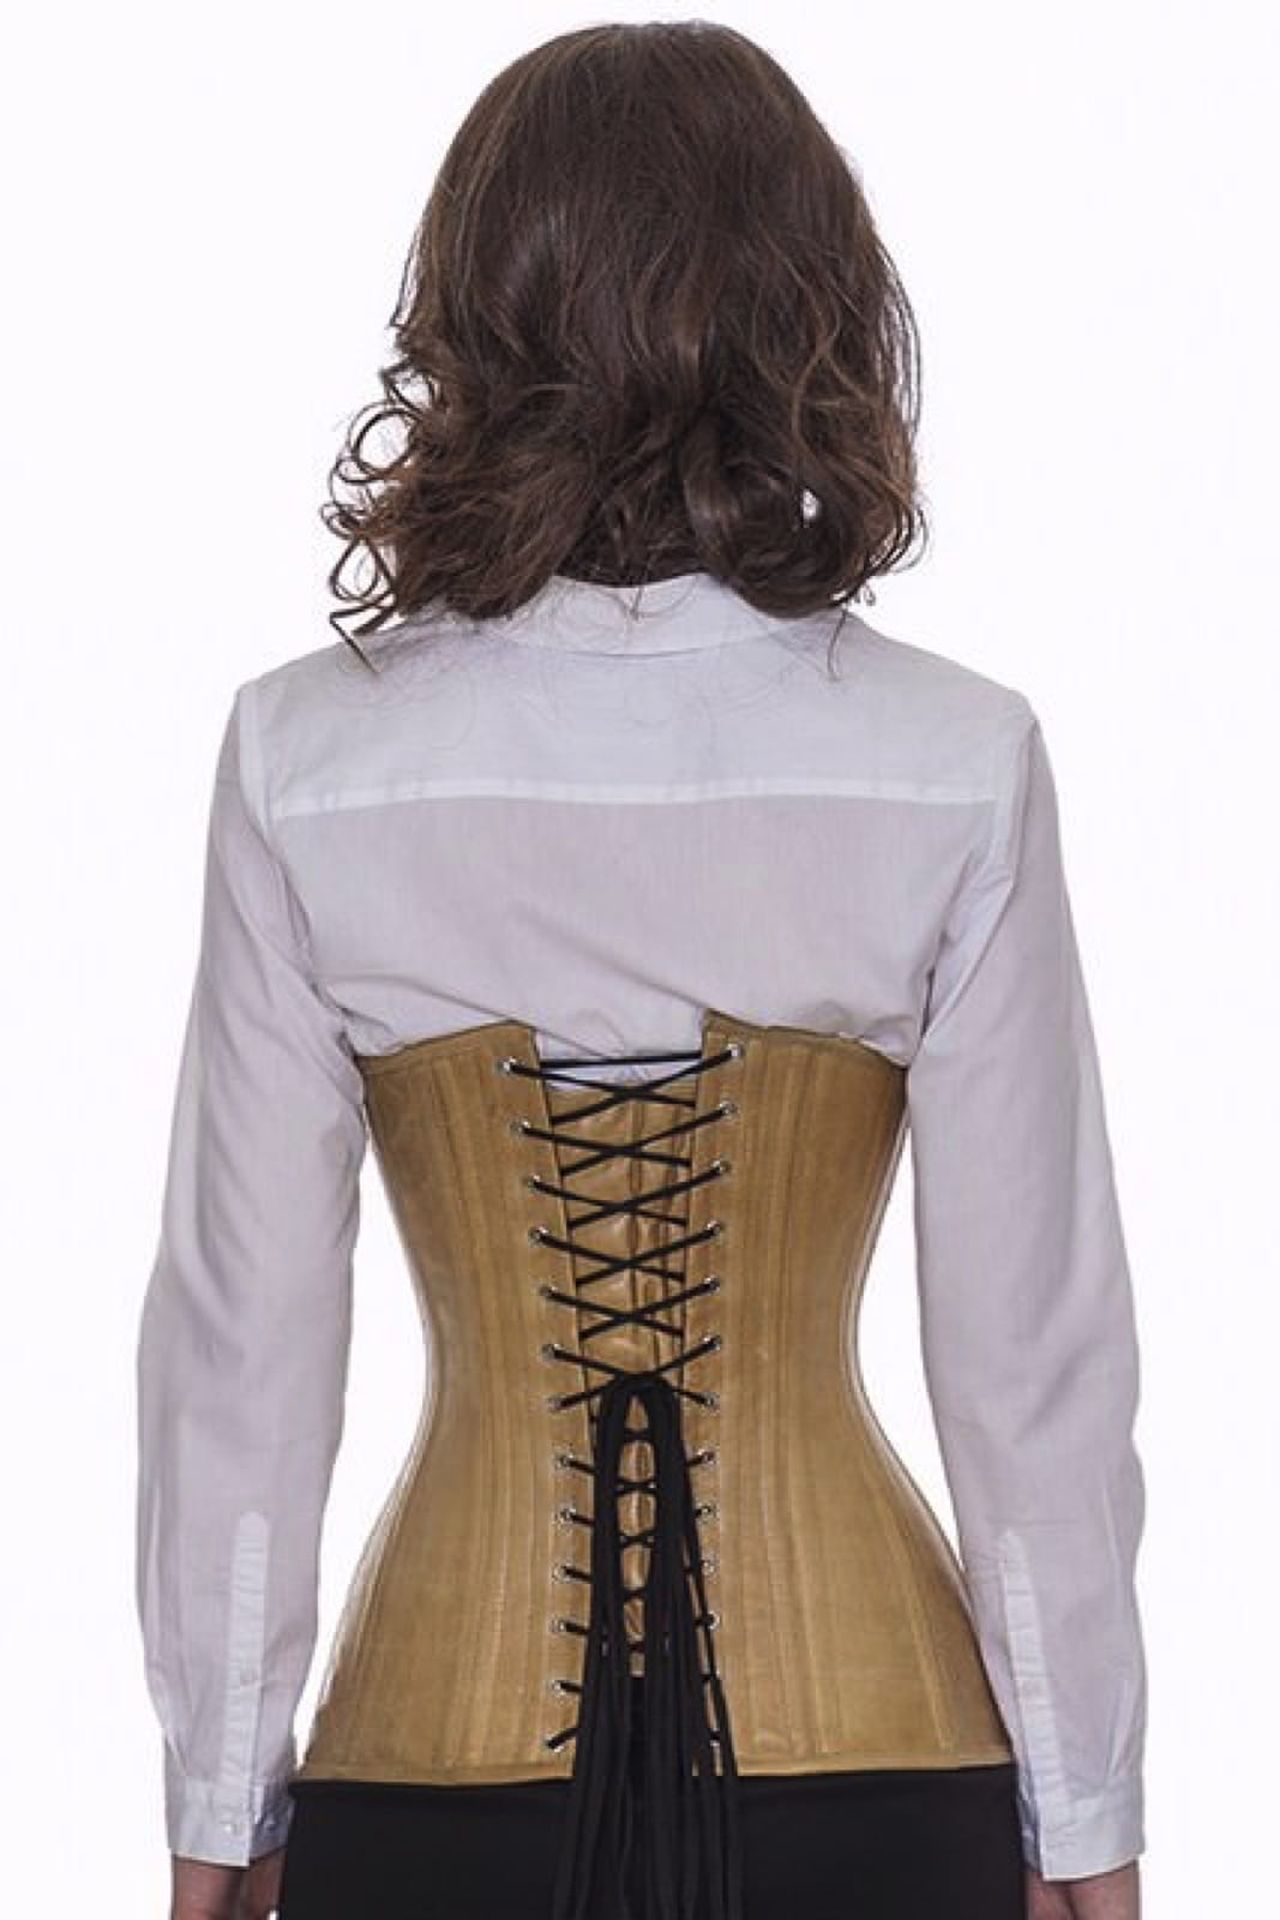 Corset beige leather curved underbust ln38